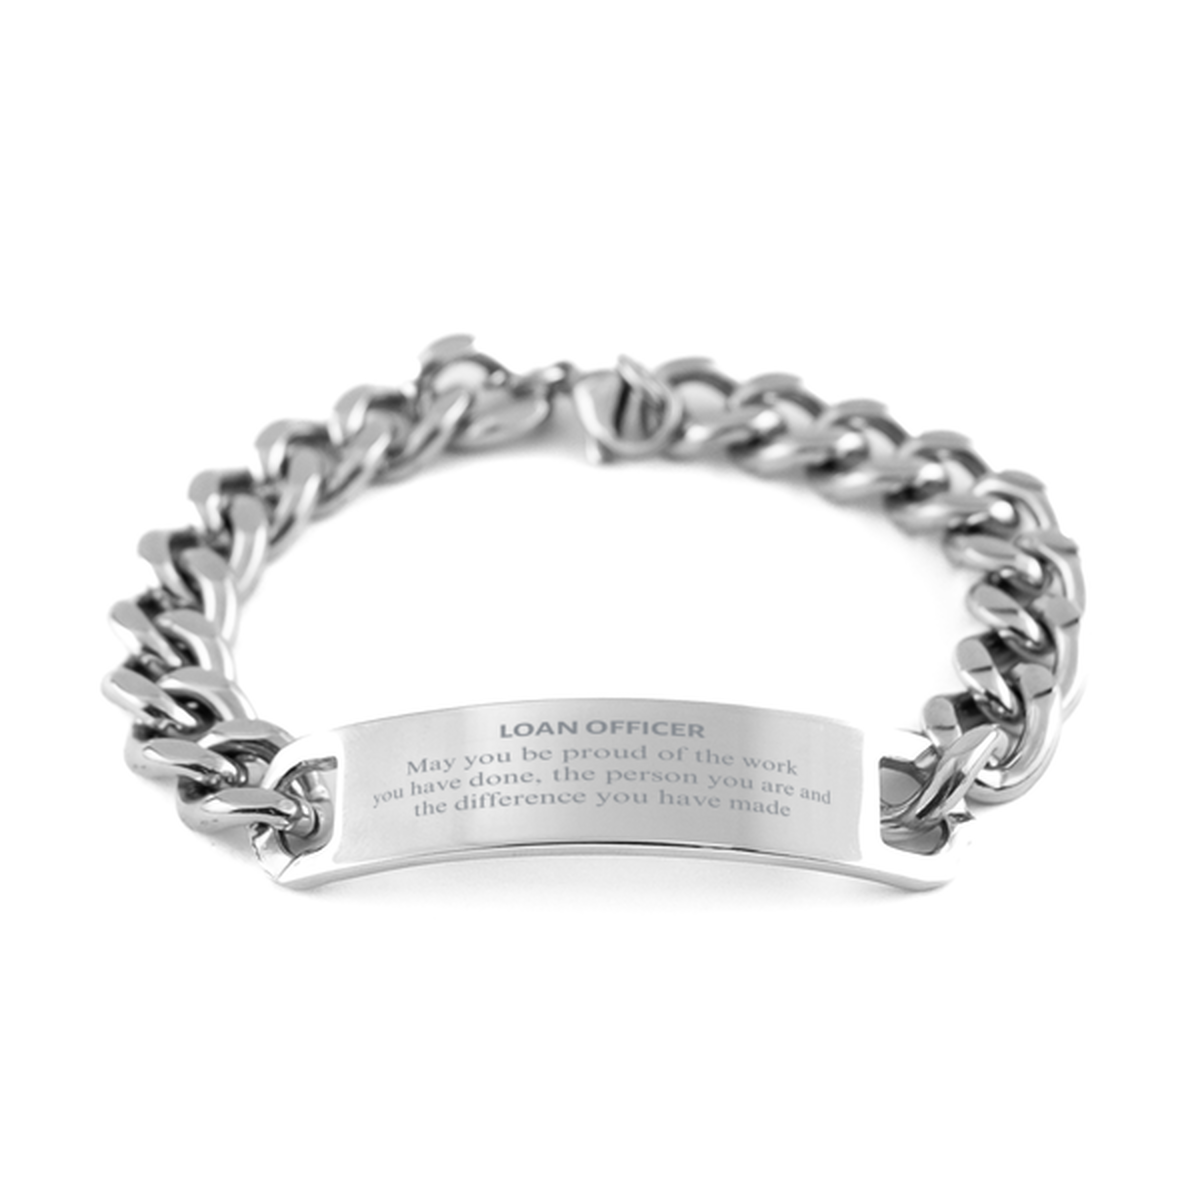 Loan Officer May you be proud of the work you have done, Retirement Loan Officer Cuban Chain Stainless Steel Bracelet for Colleague Appreciation Gifts Amazing for Loan Officer